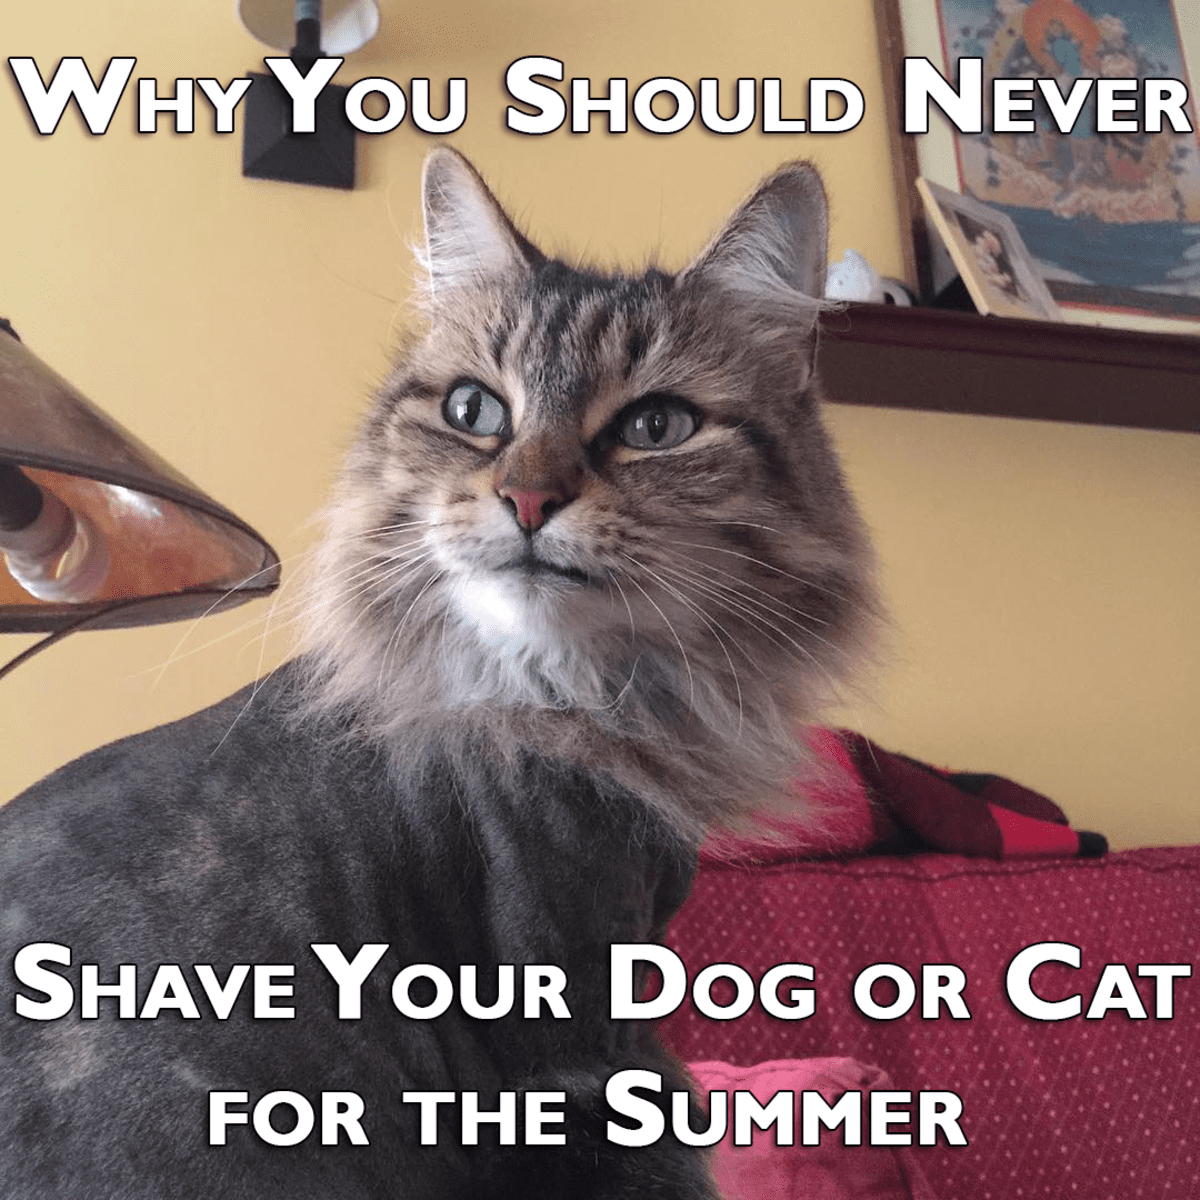 Why You Should Never Shave Your Dog or Cat for the Summer - PetHelpful